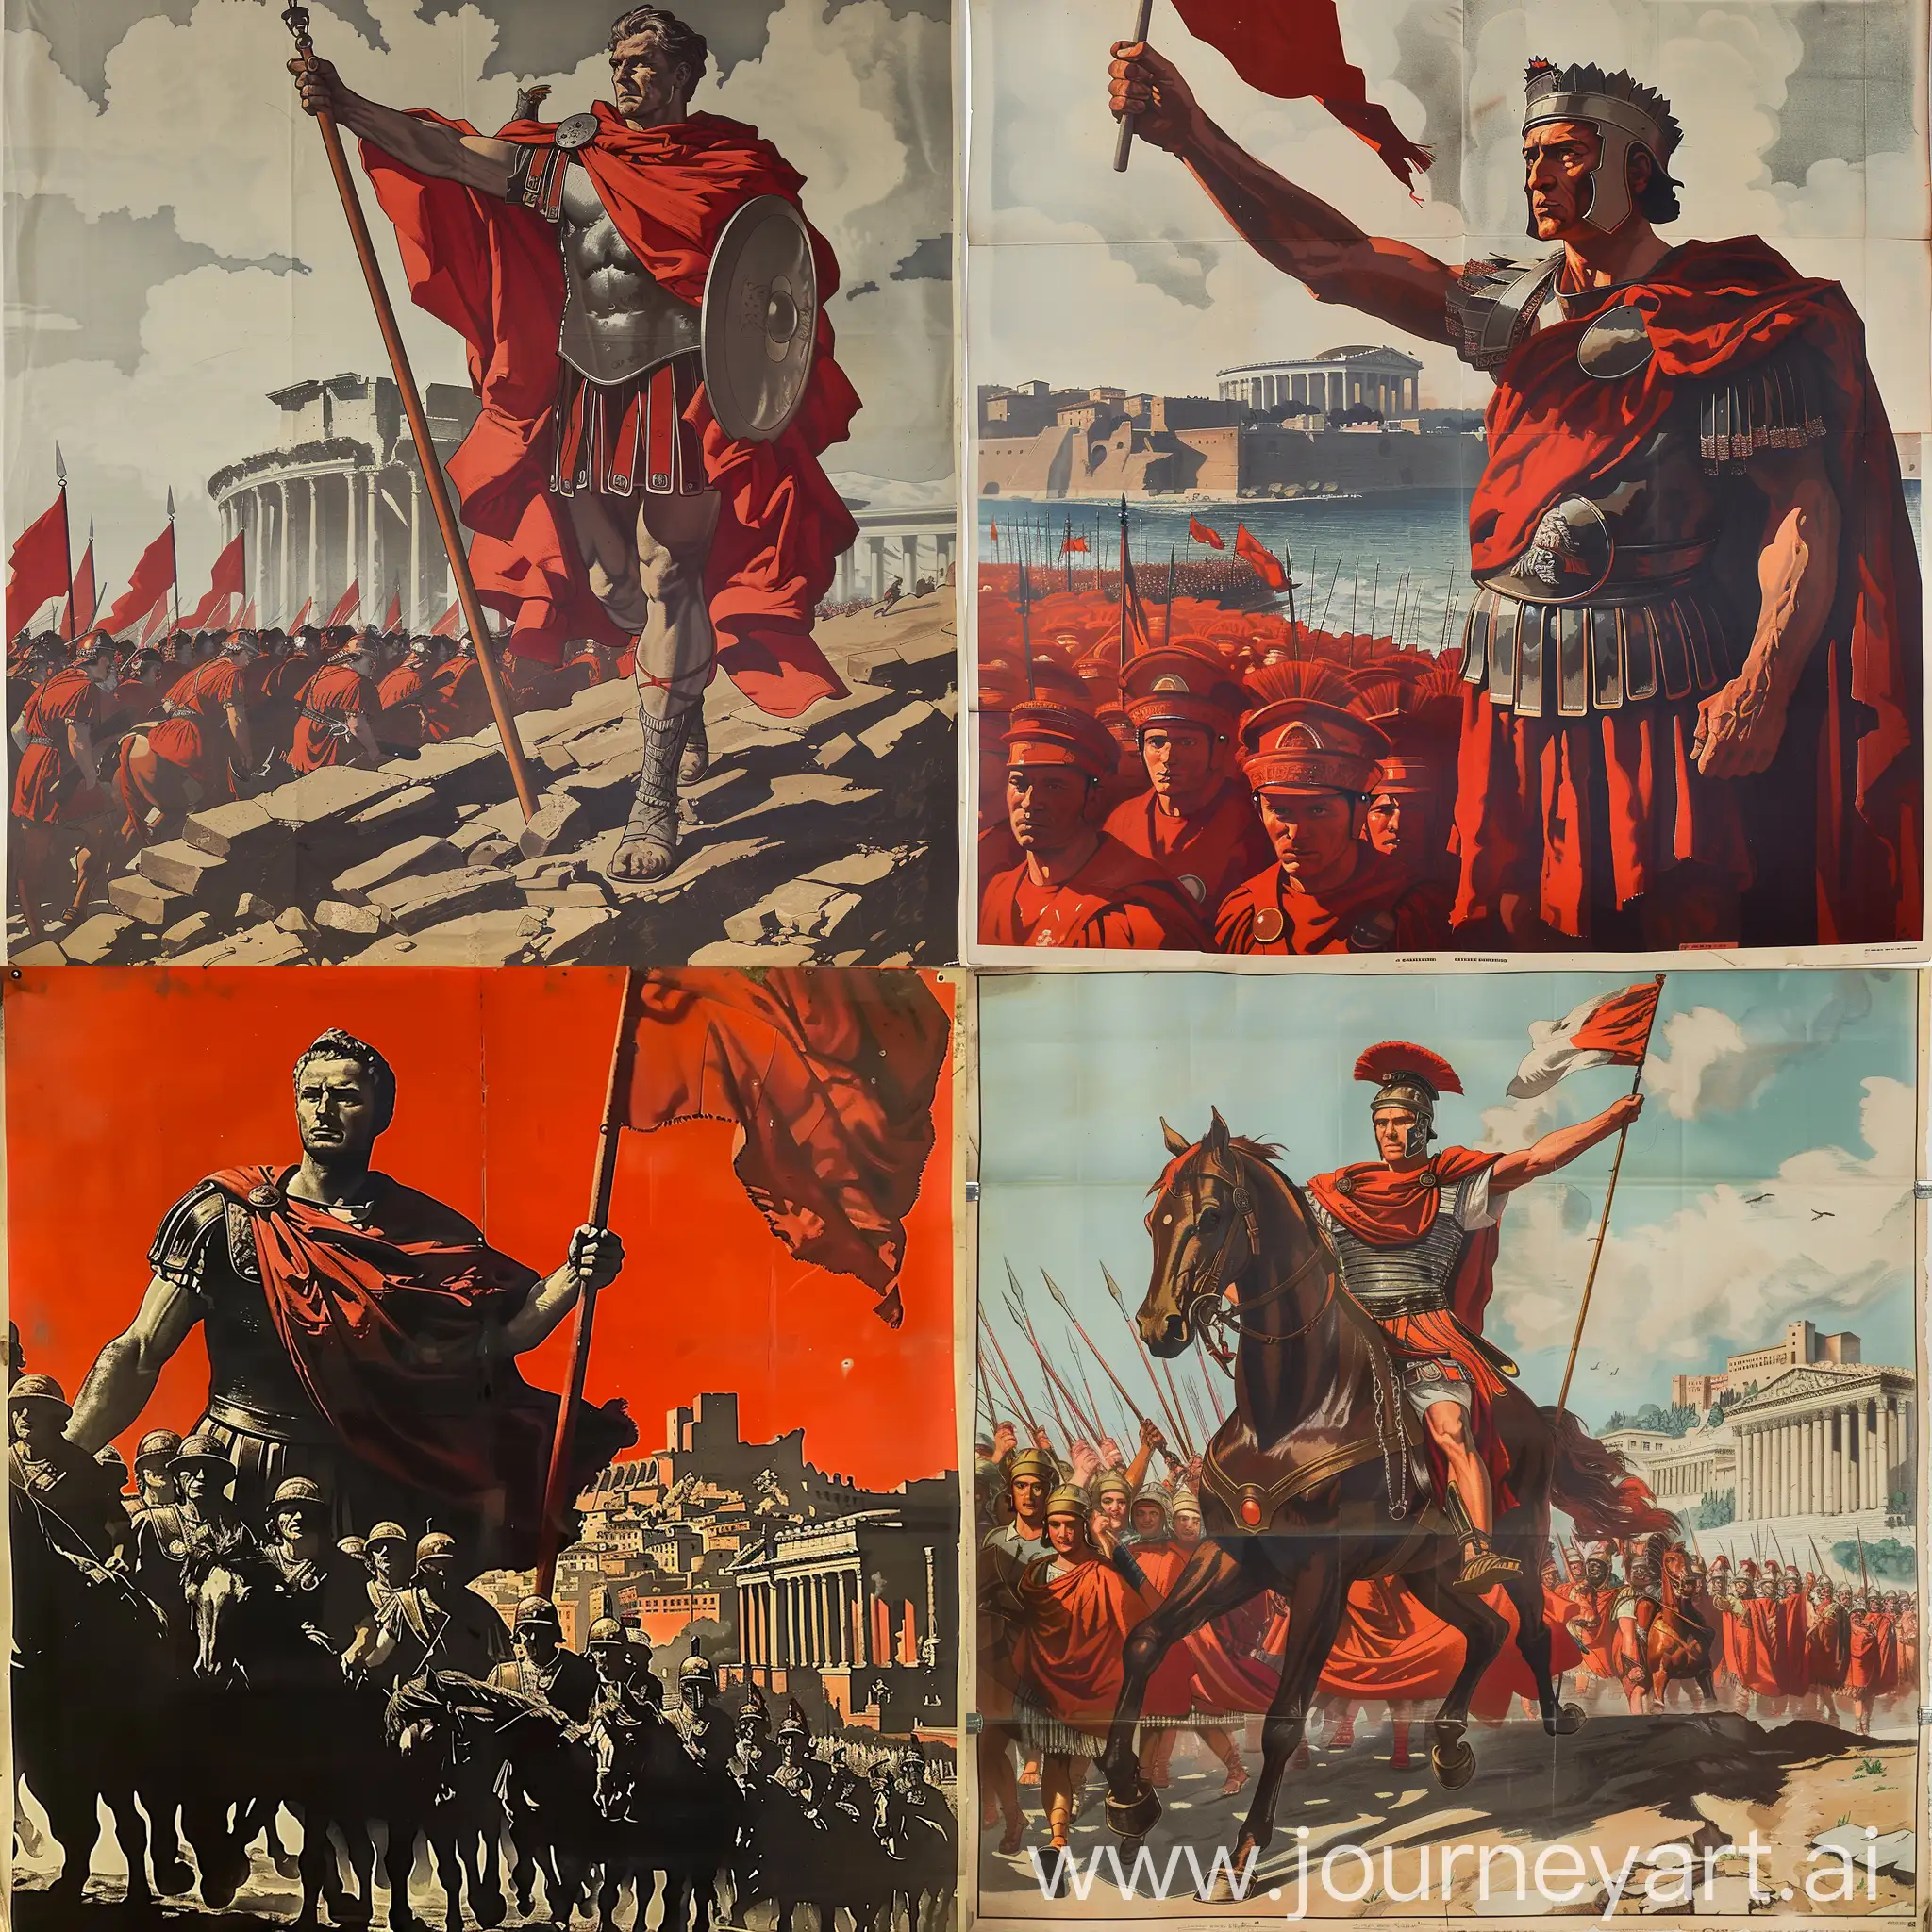 soviet propaganda style poster of julius caesar as he crosses the rubicon and marches on rome, patriotic
